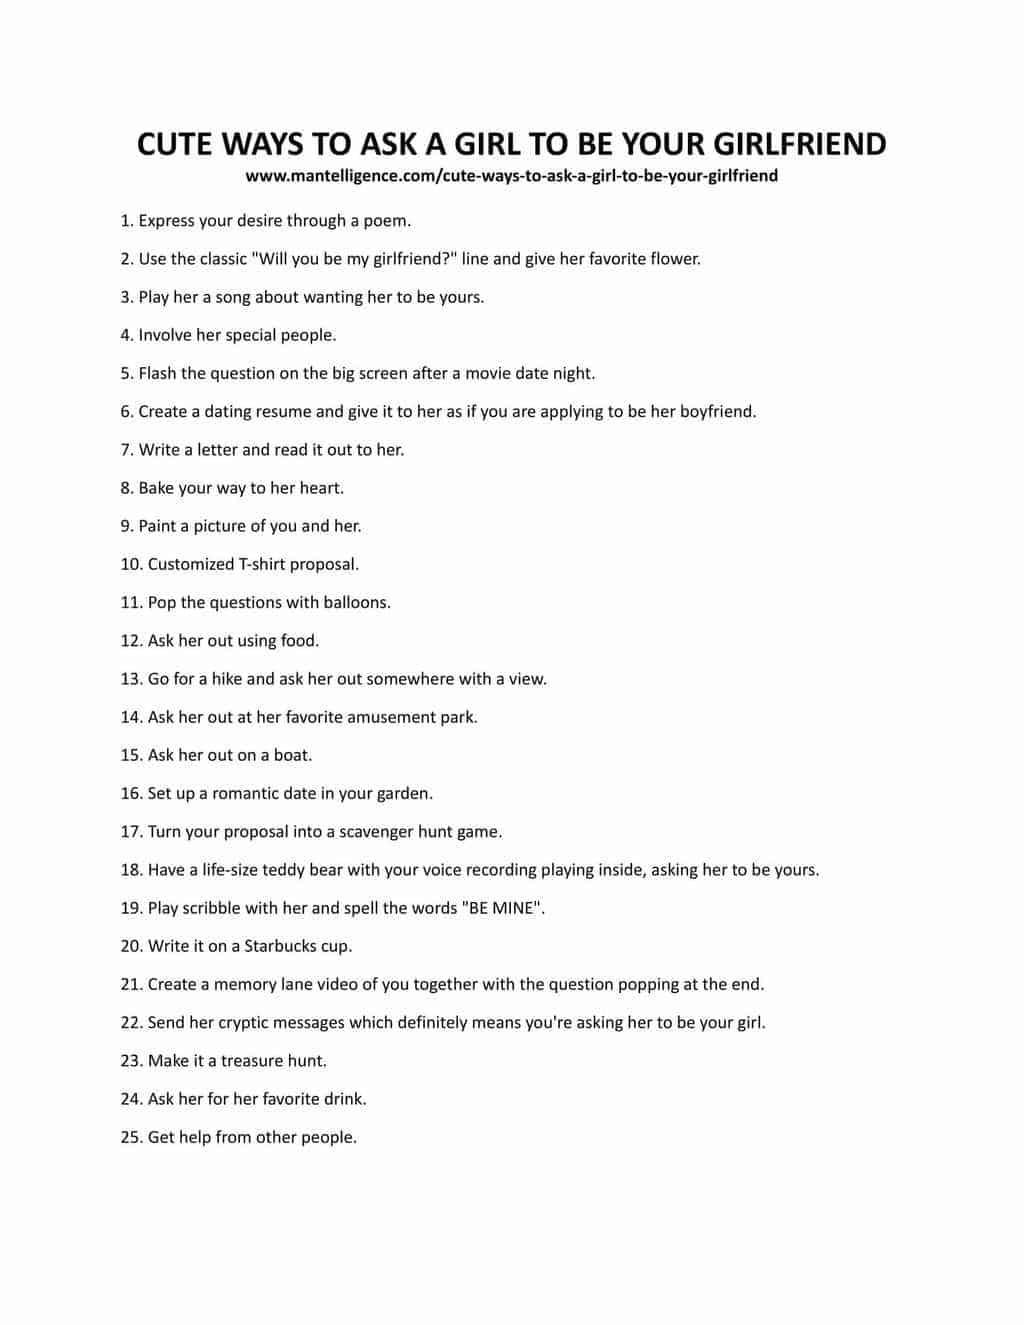 Downloadable list of Ways to Ask a Girl